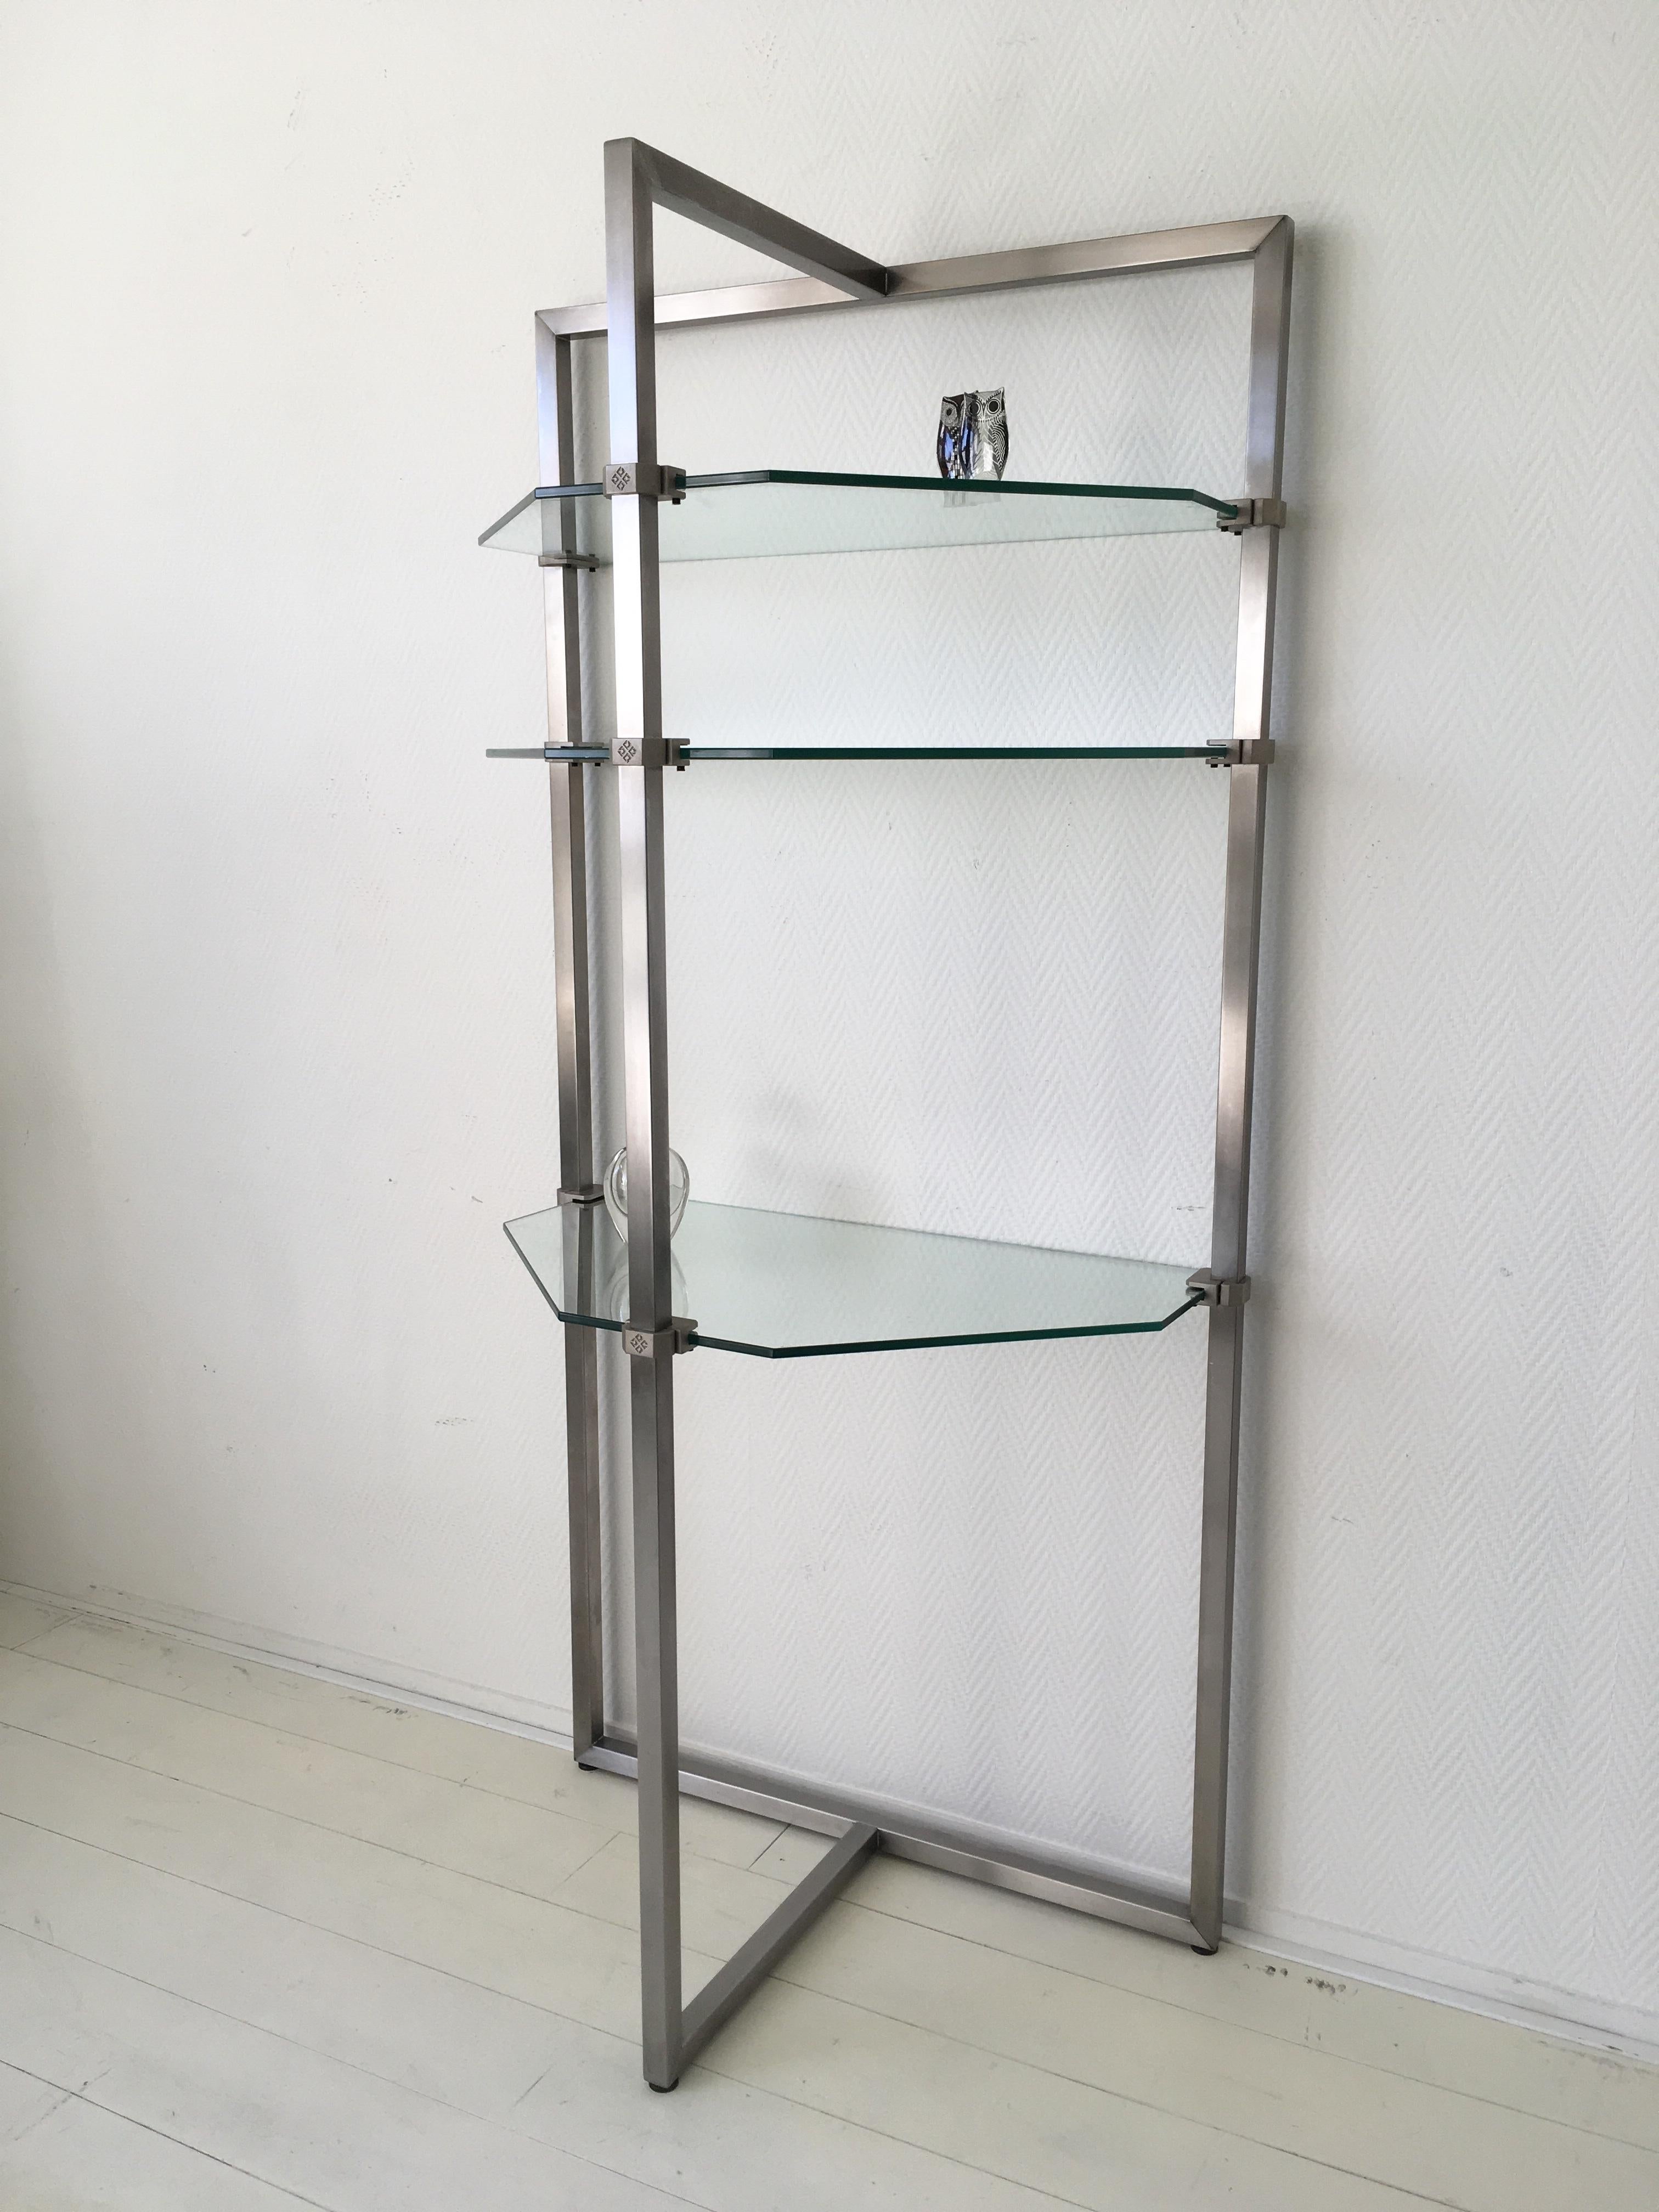 Dutch Stainless Steel and Glass Wall Shelf, Bookcase by Peter Ghyzy.  FINAL SALE For Sale